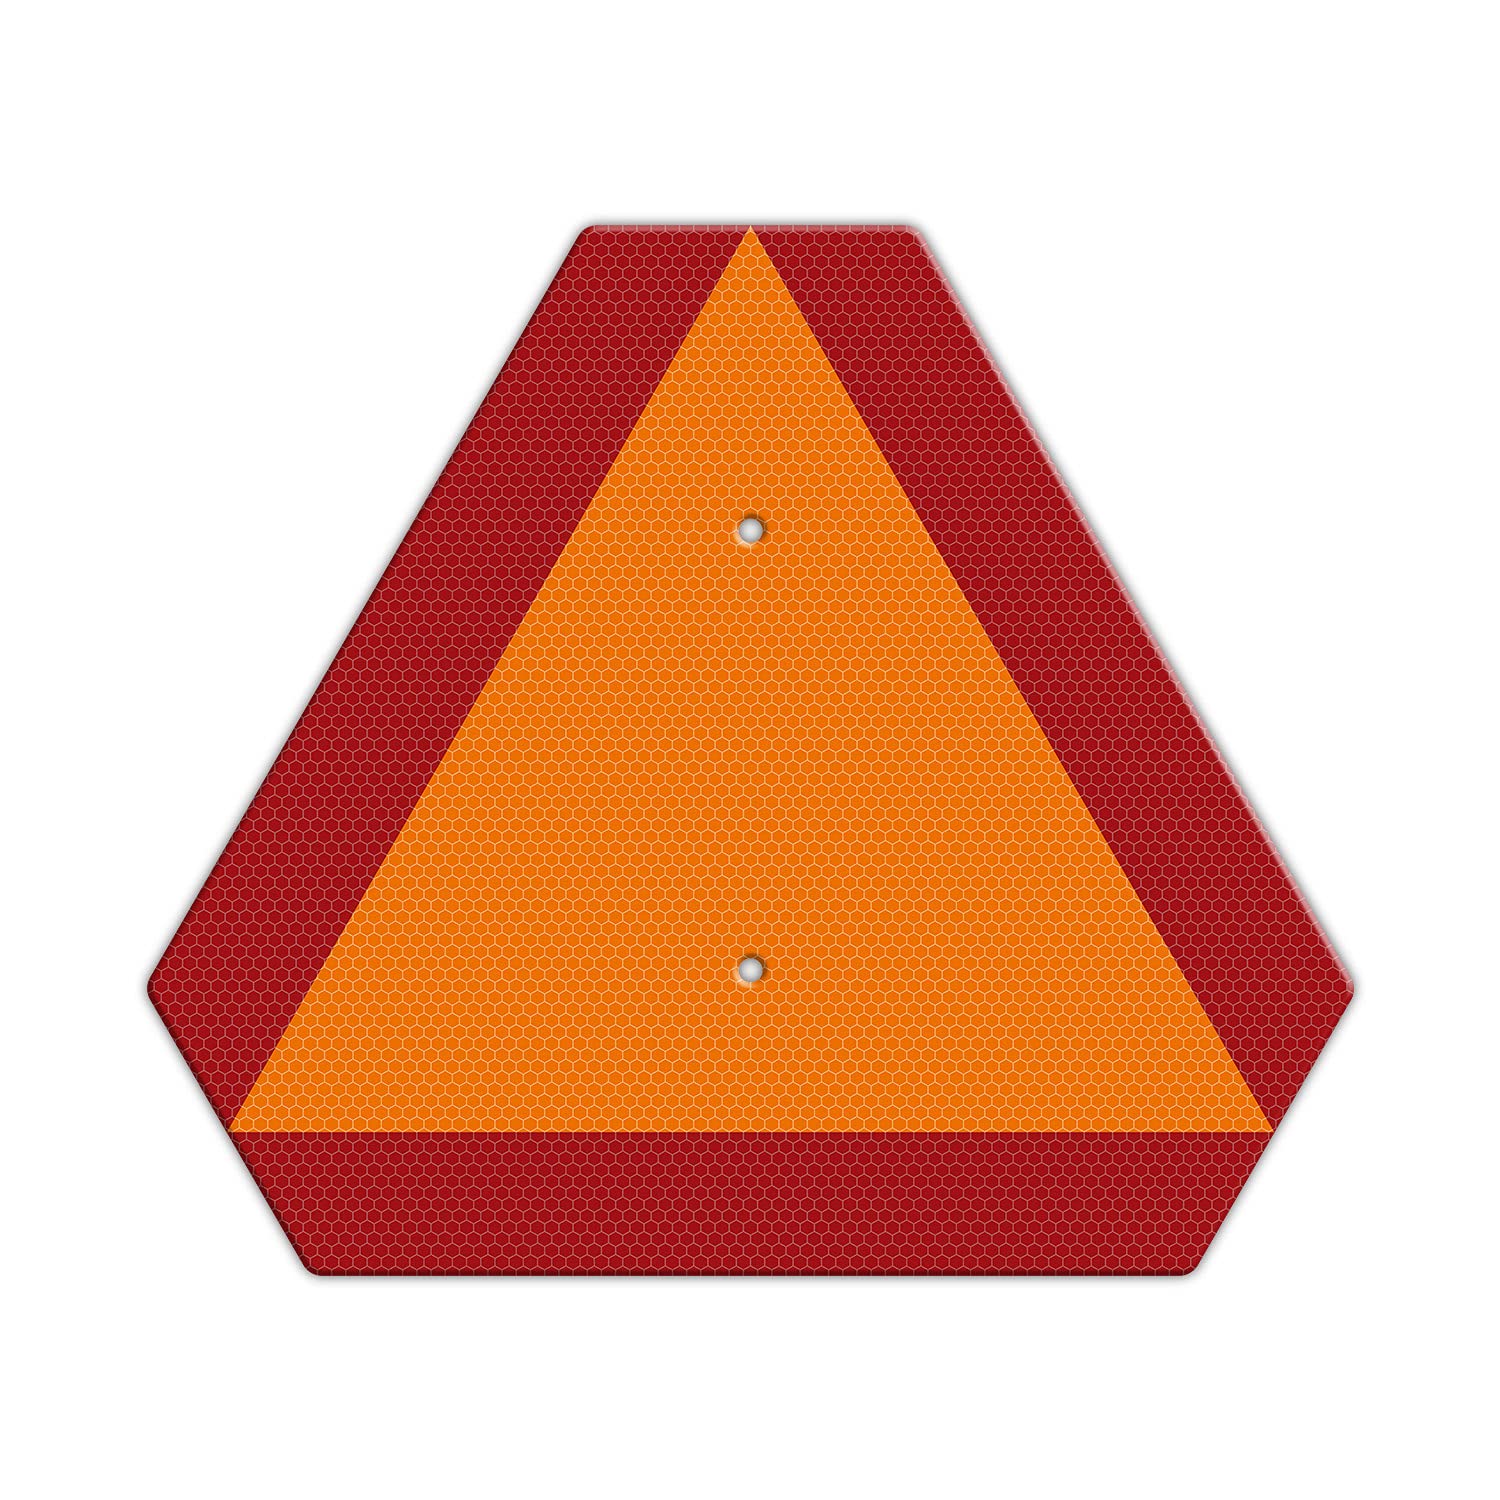 Slow Moving Vehicle Sign Triangle Sign with Reflector, Farm Triangle Safety Sign, SMV Sign, 14 x16 Engineering Grade Reflective Aluminum Golf Cart Accessories, Up to 7 Years Outdoor (Orange)